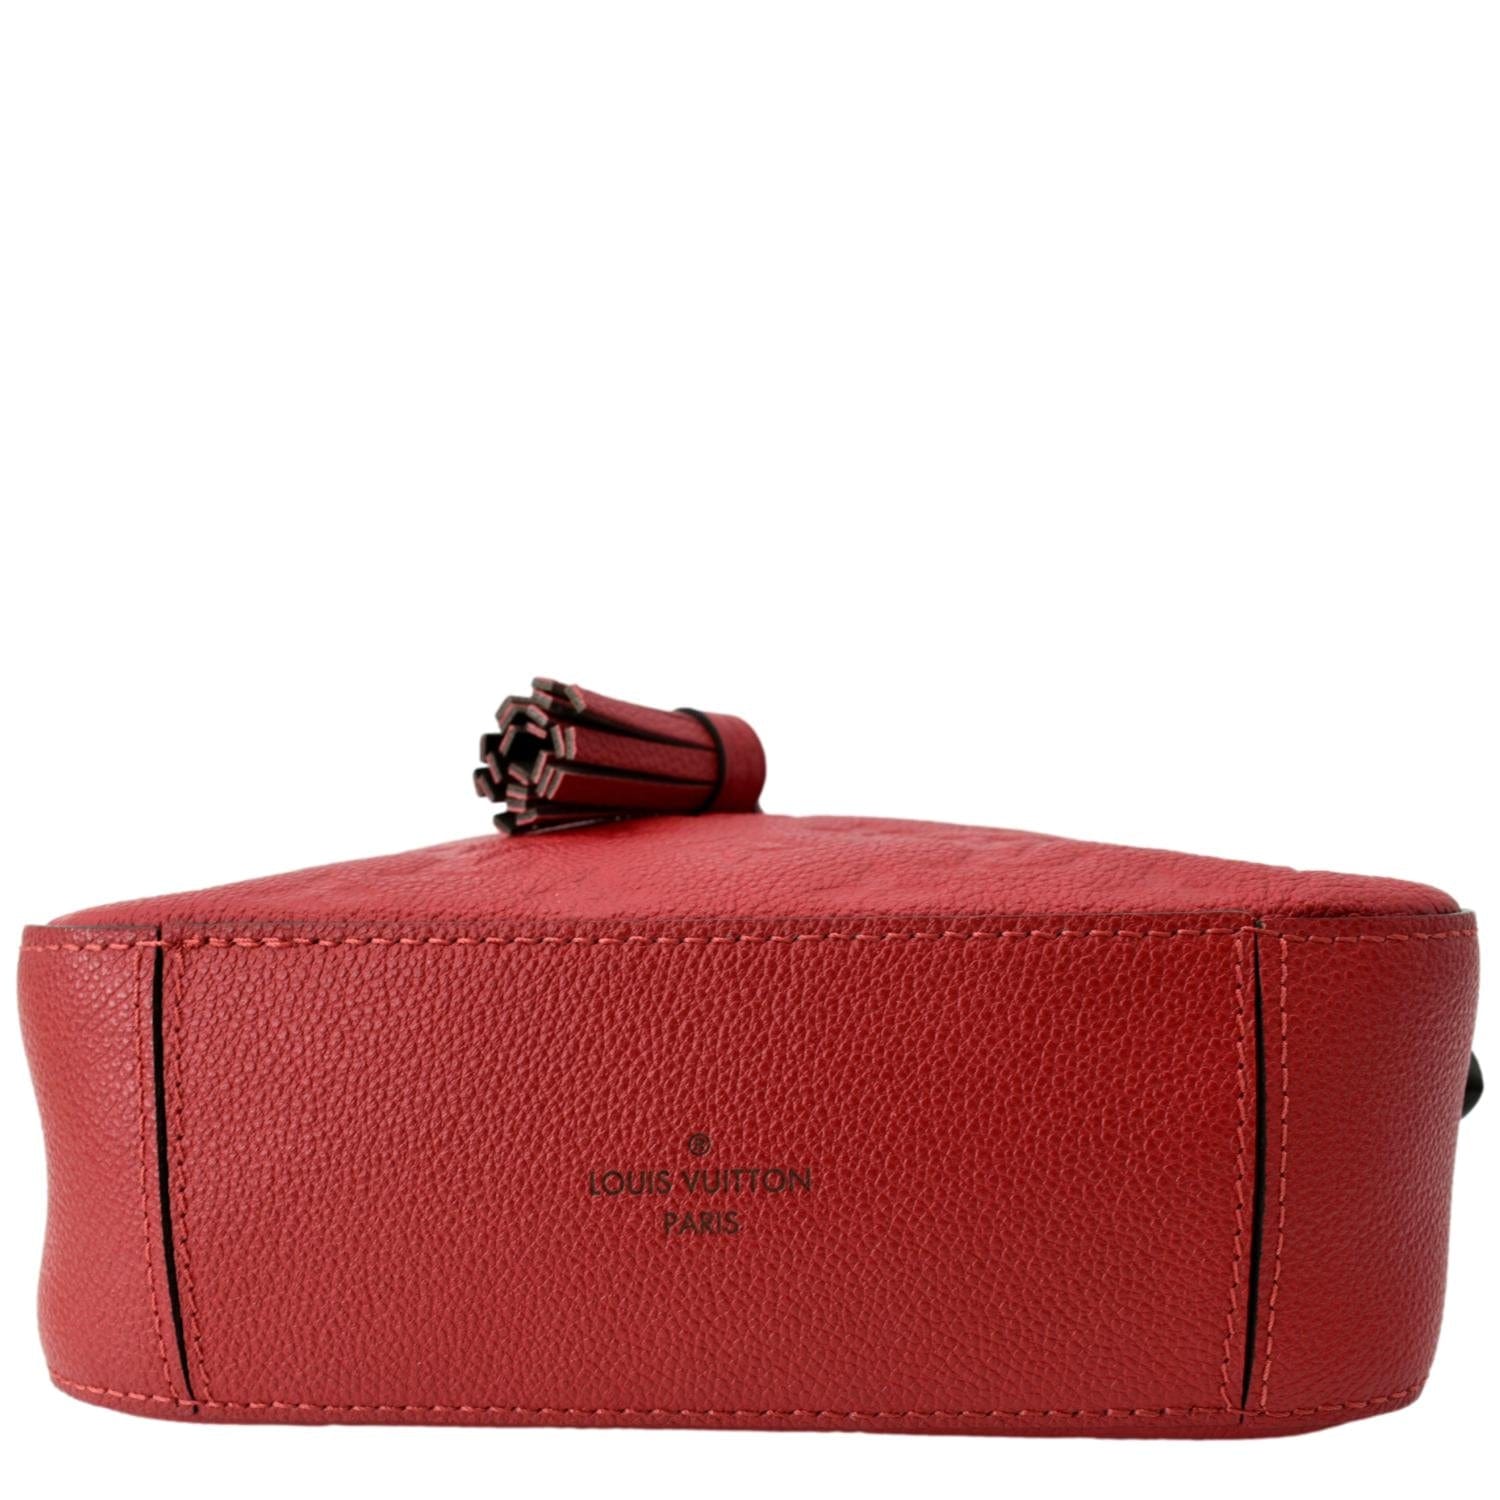 Saintonge leather crossbody bag Louis Vuitton Red in Leather - 36560314